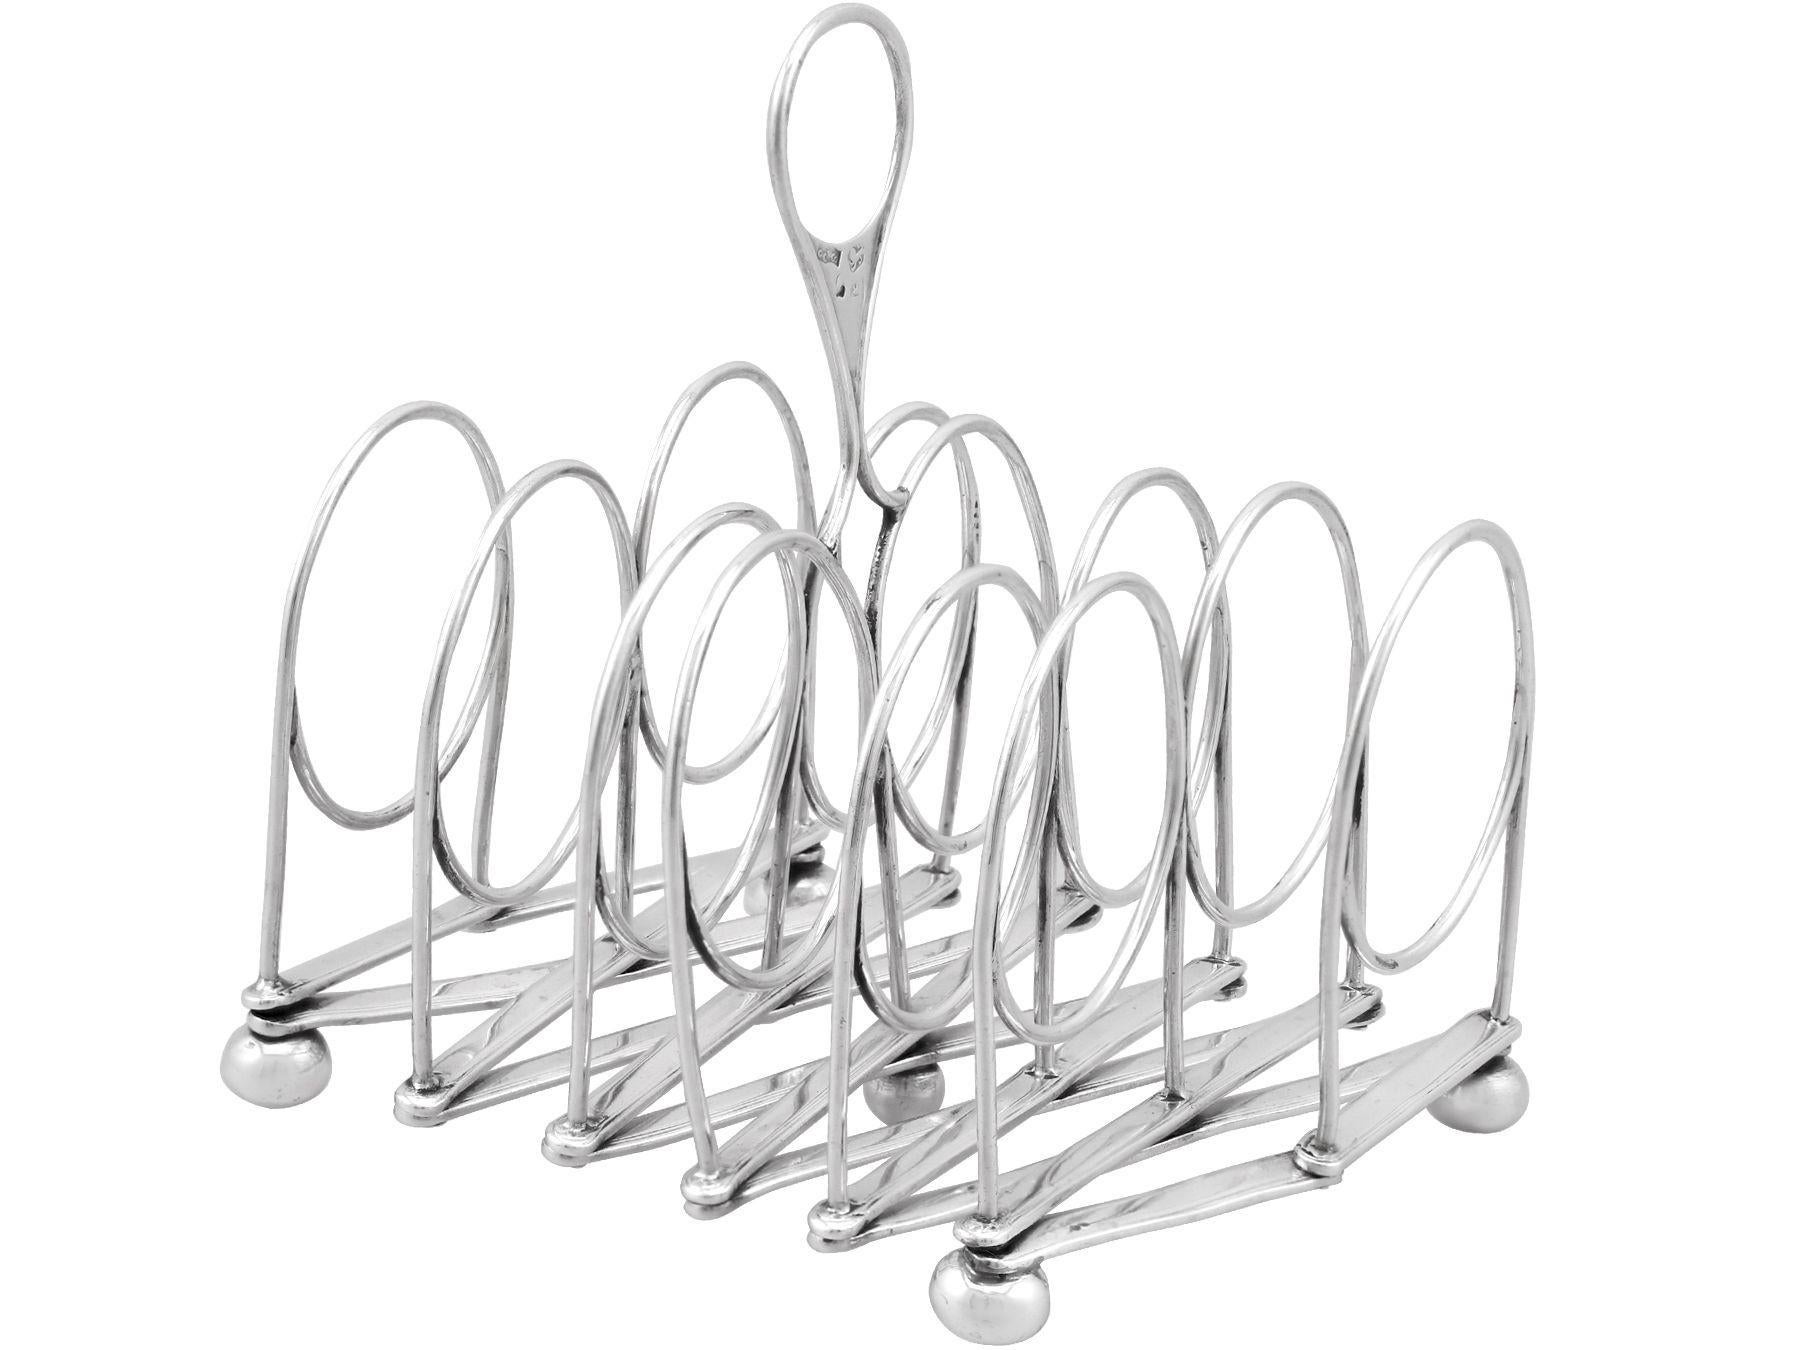 An exceptional, fine and impressive antique Georgian English sterling silver expanding toast/letter rack; an addition to our dining silverware collection

This exceptional antique sterling silver expandable toast / letter rack has a rounded